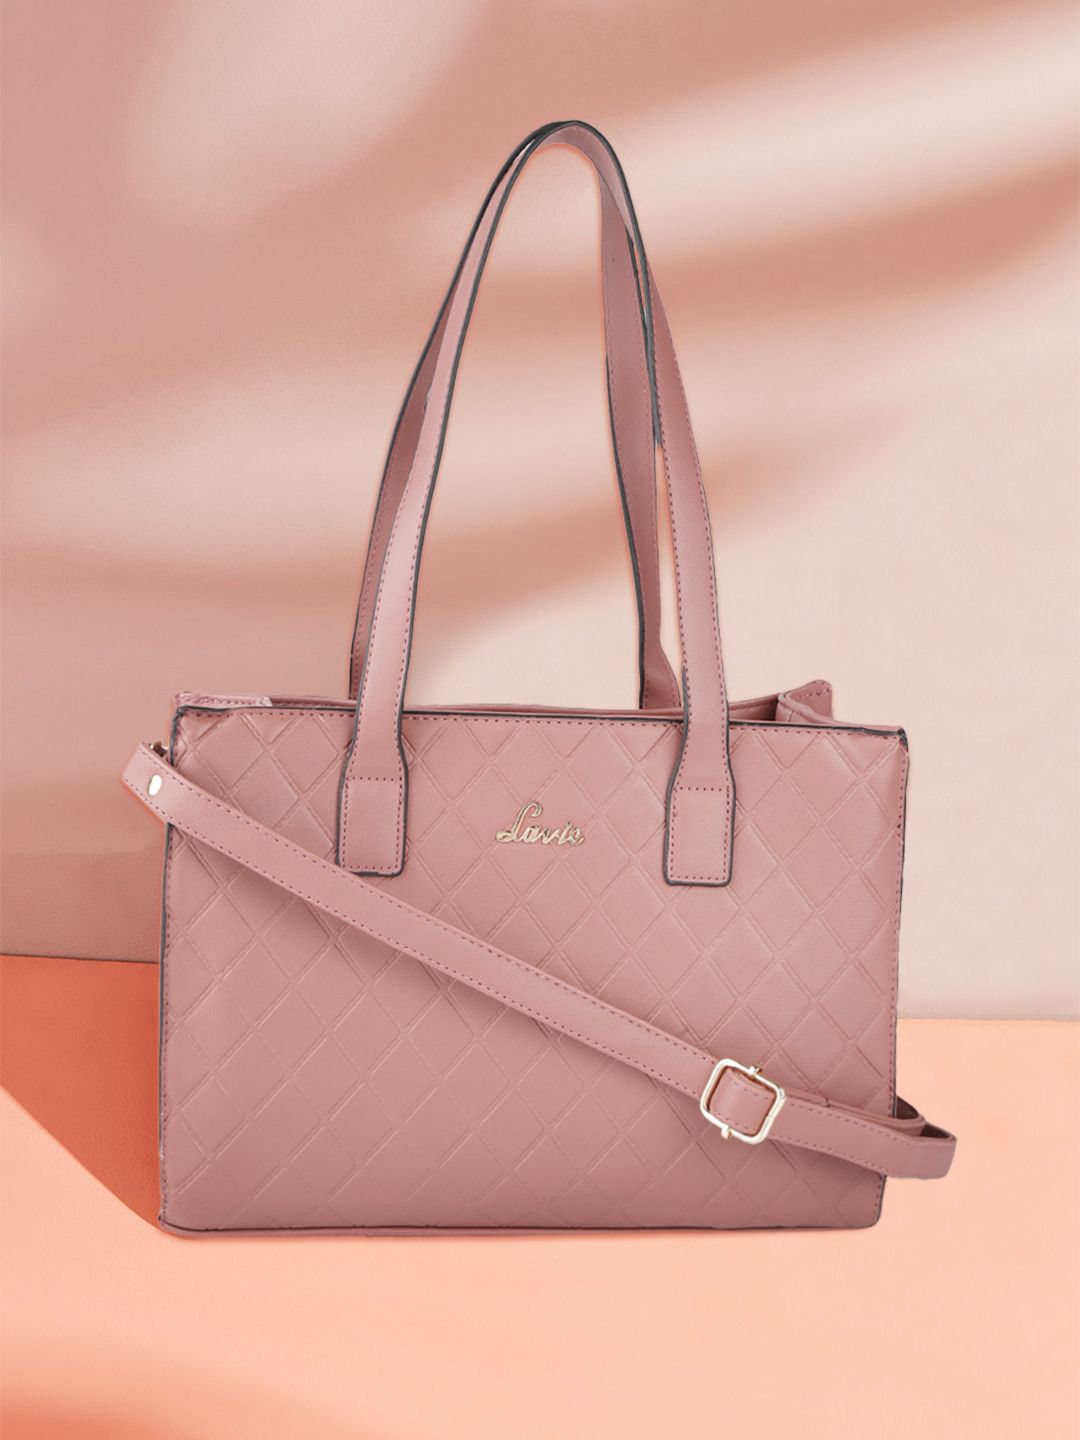 Lavie Dusty Pink Textured Shoulder Bag Price in India